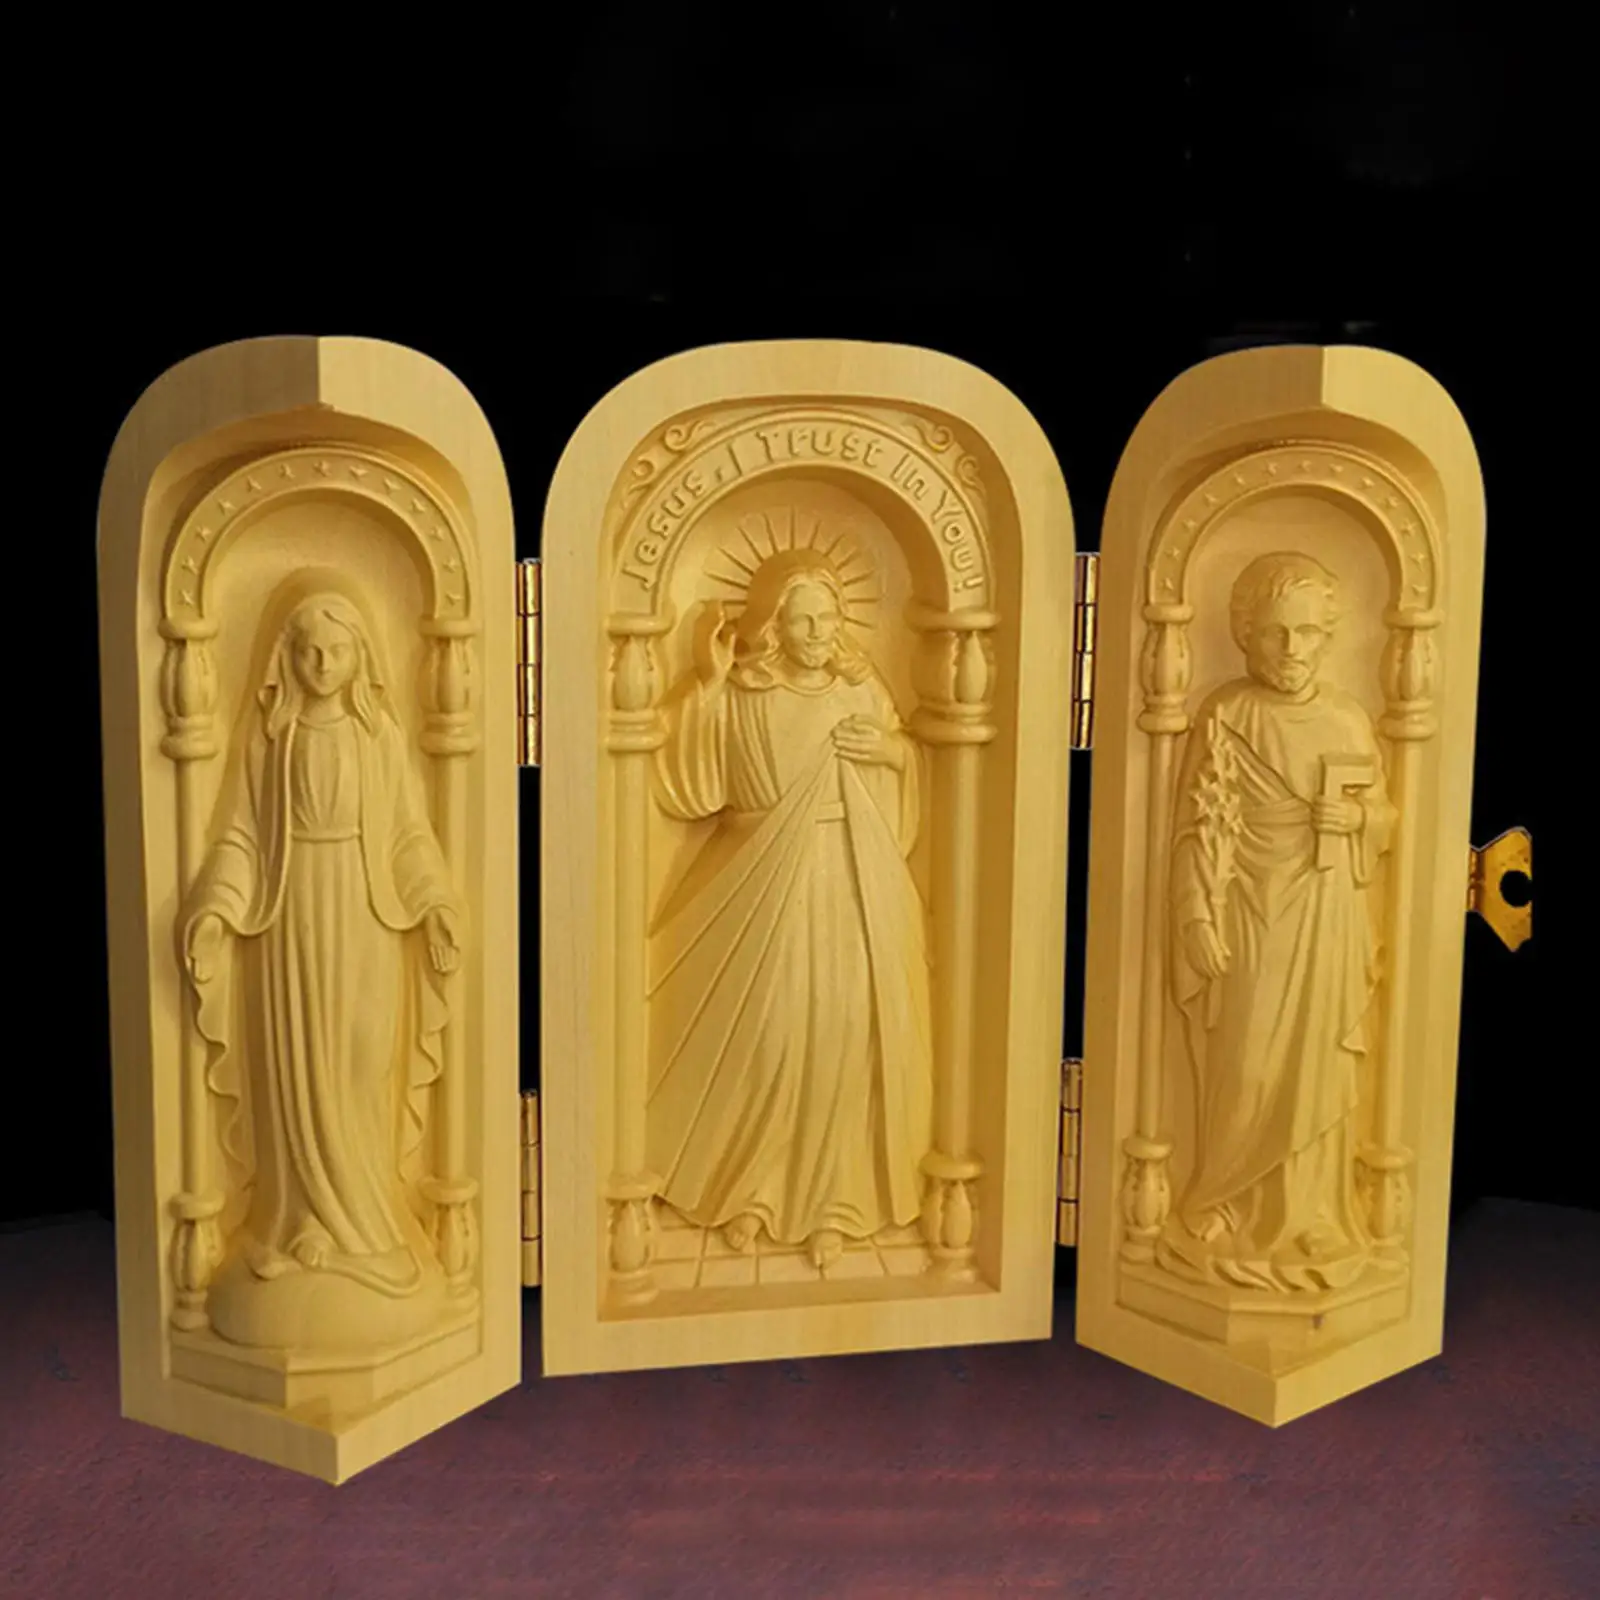 Wood Carving Ornaments Catholic Cardinal Ornament Religious Decor Catholic Relics for Desktop Living Room Home Office Collection